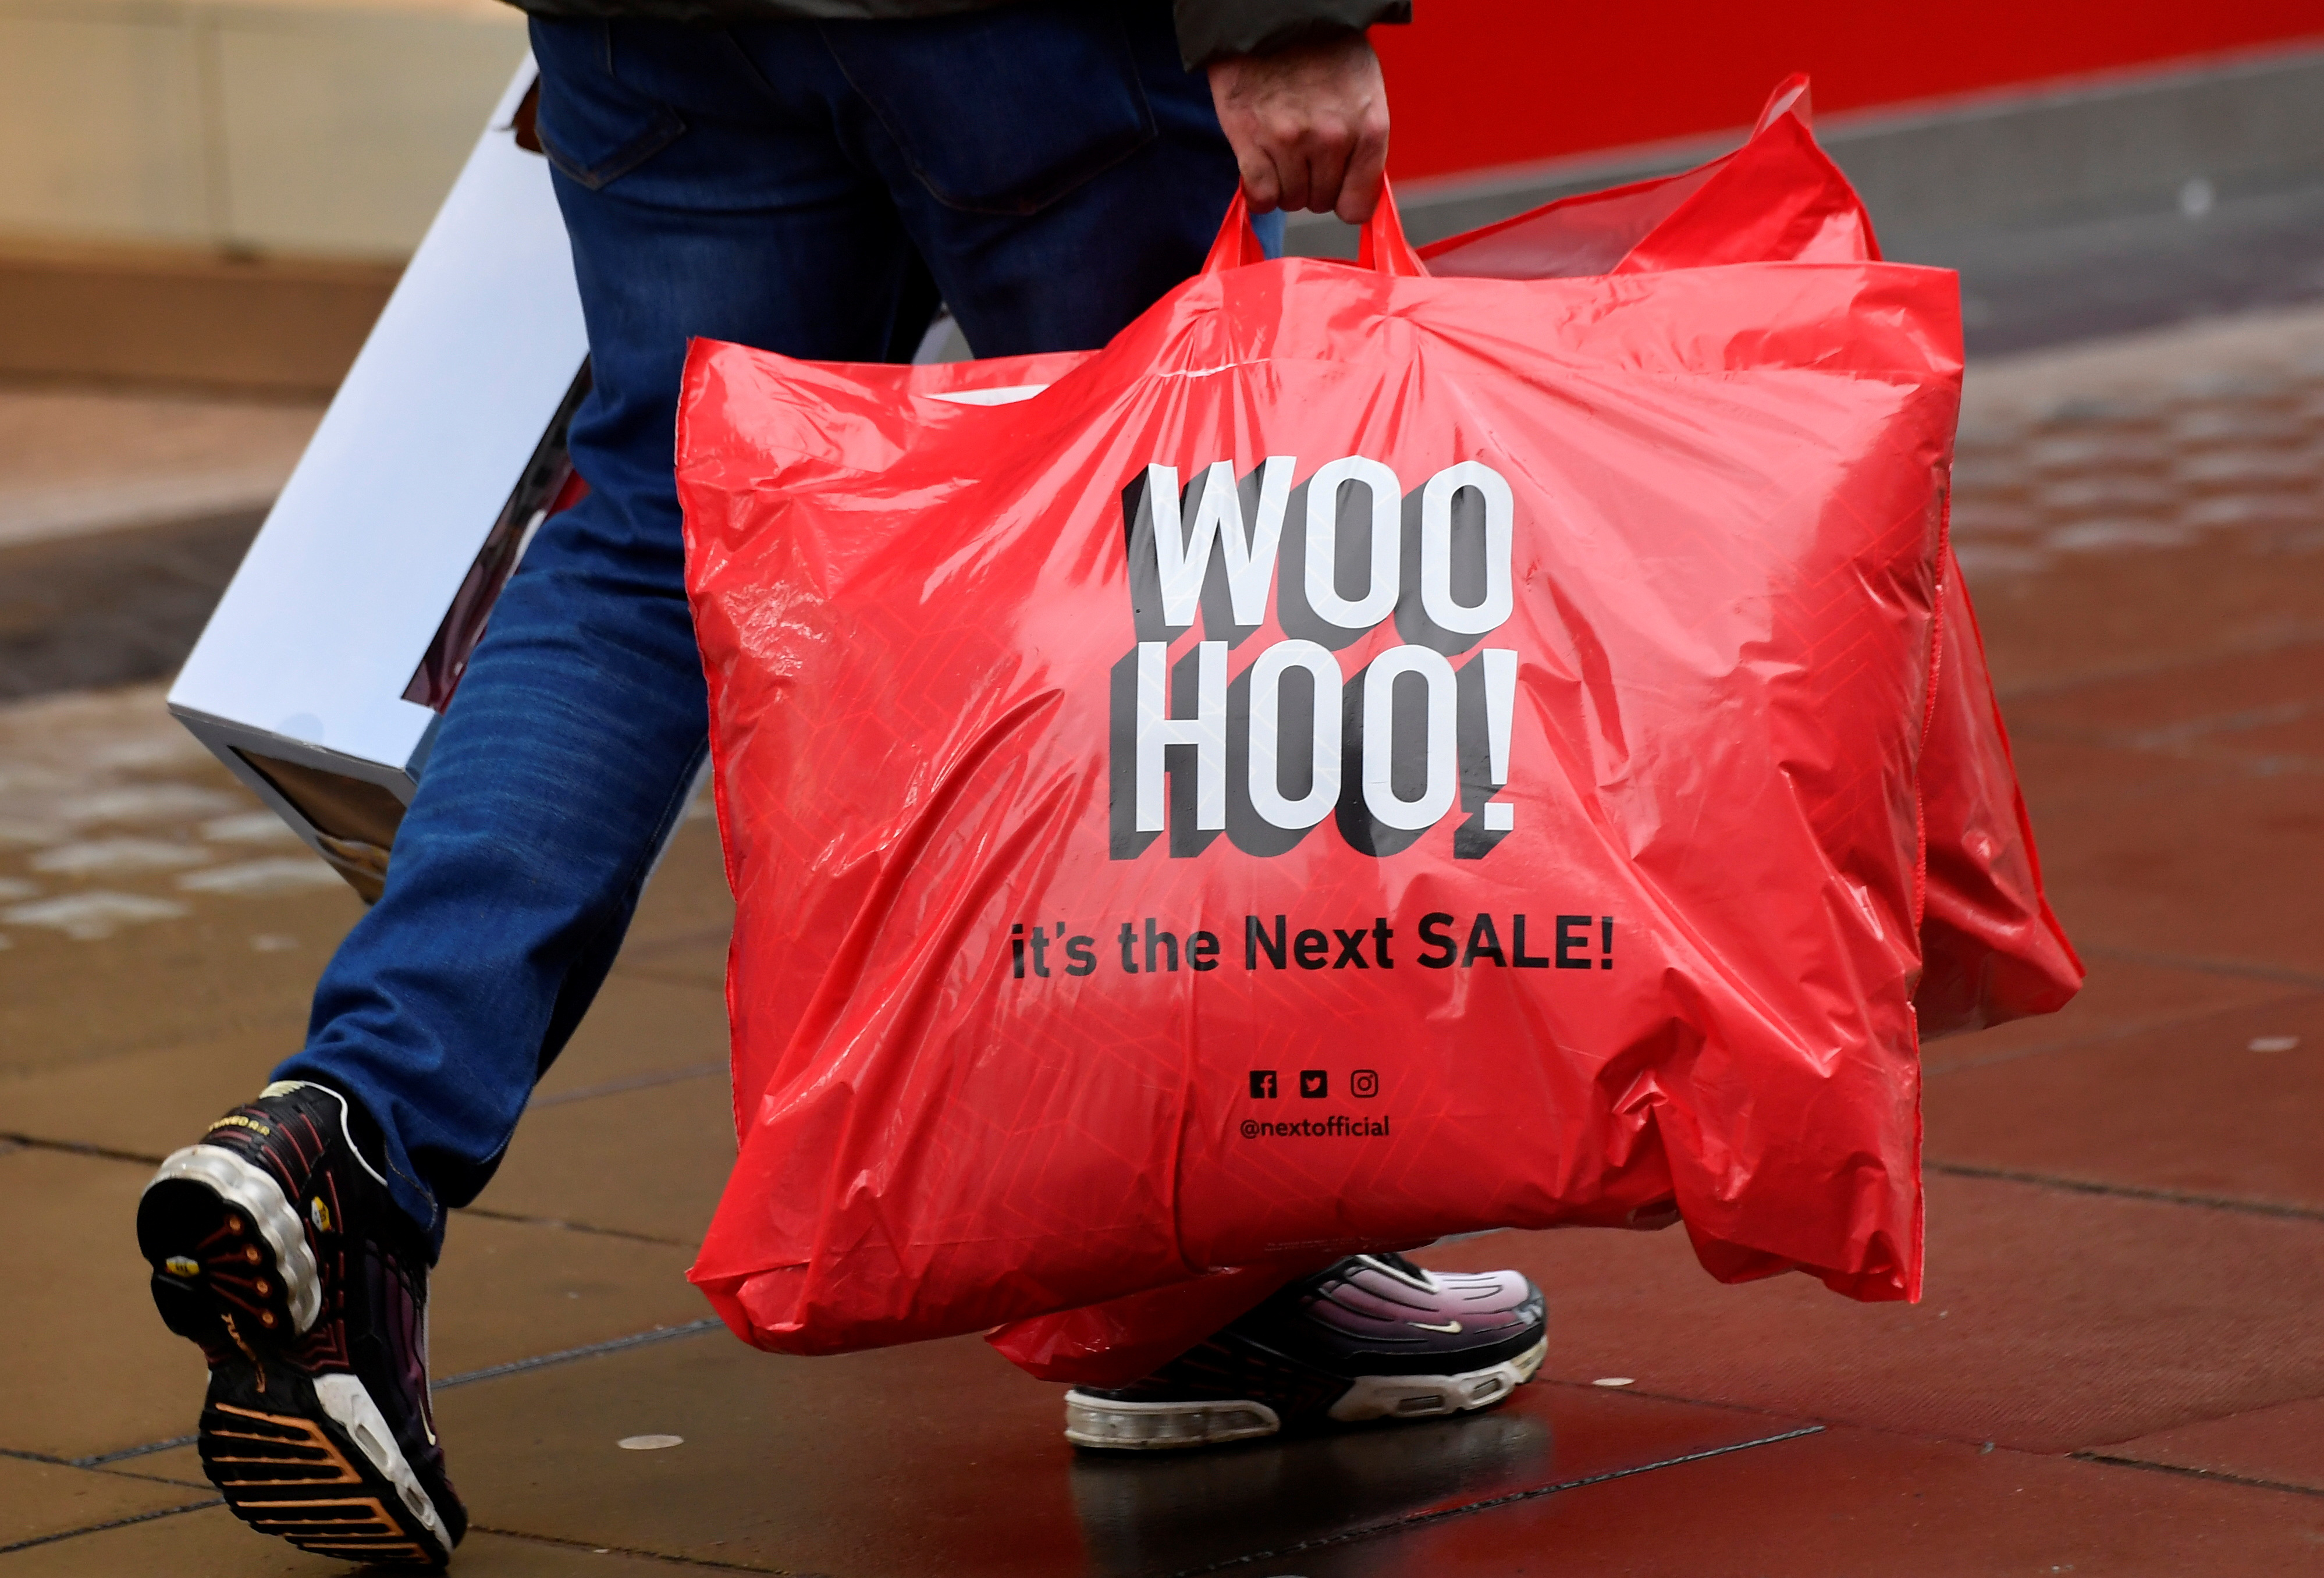 A shopper carries a bag advertising the clothing retailer Next in London